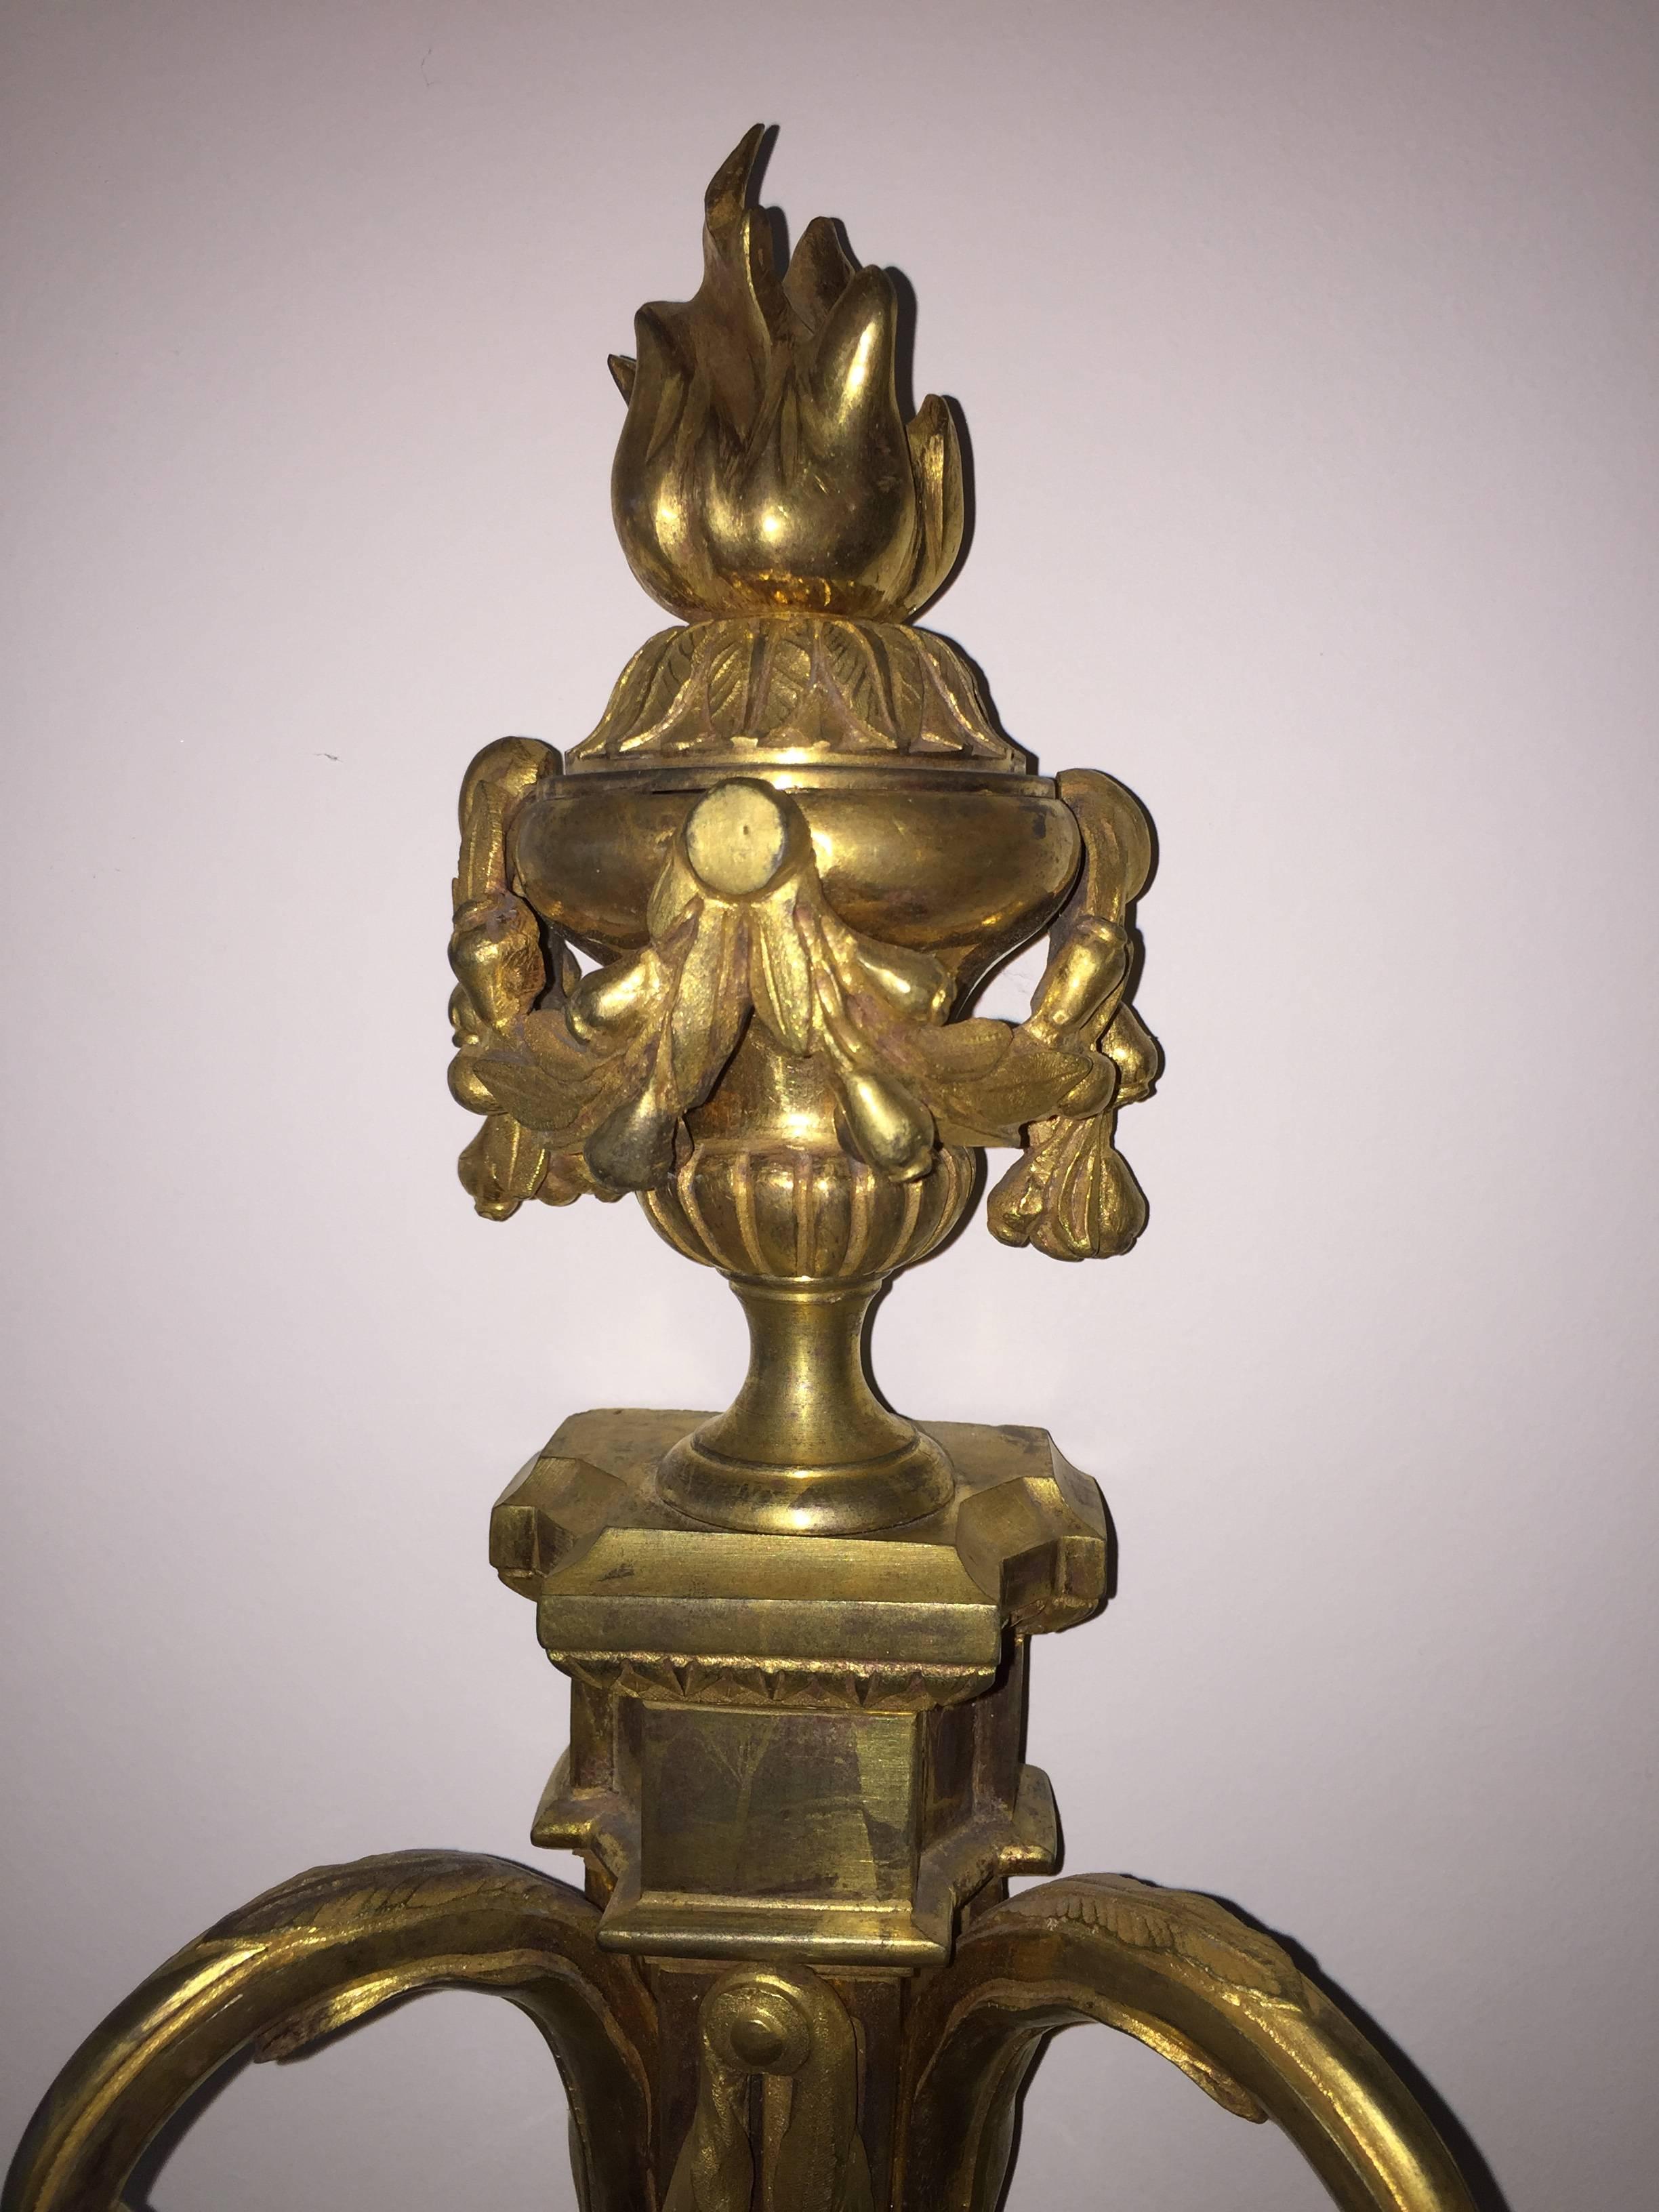 Large pair of candlesticks wall lights Louis XVI of the late 18th century, French origin. Two carved and gilded bronze arms. The fluted barrel and garlands of foliage. They are topped with a firepot also surrounded by garlands.